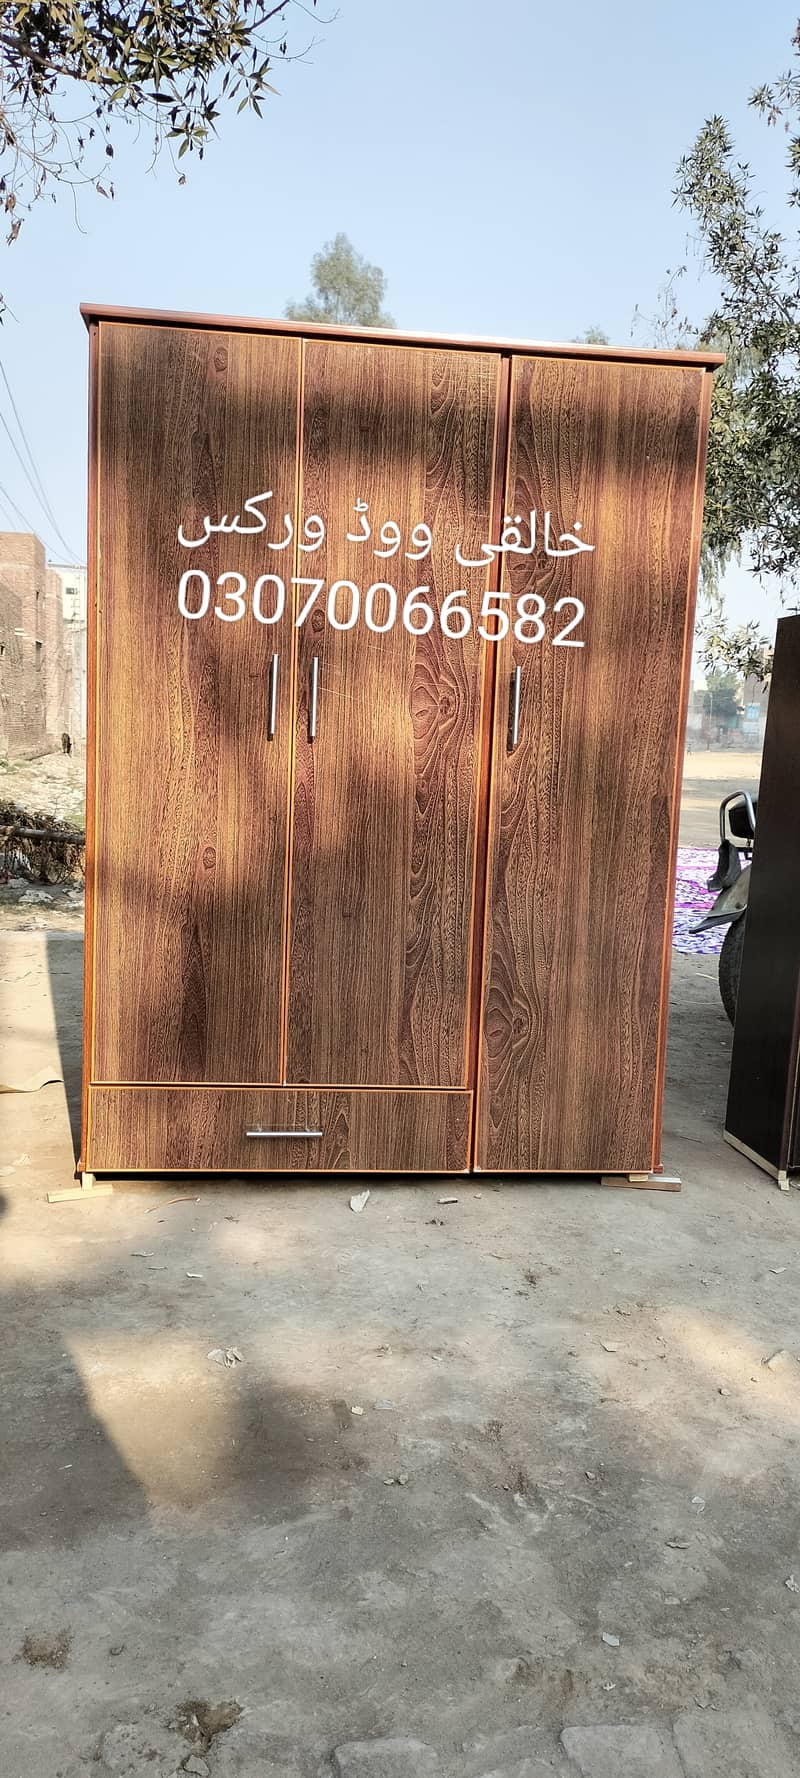 Wood wardrobes available or wood work 1